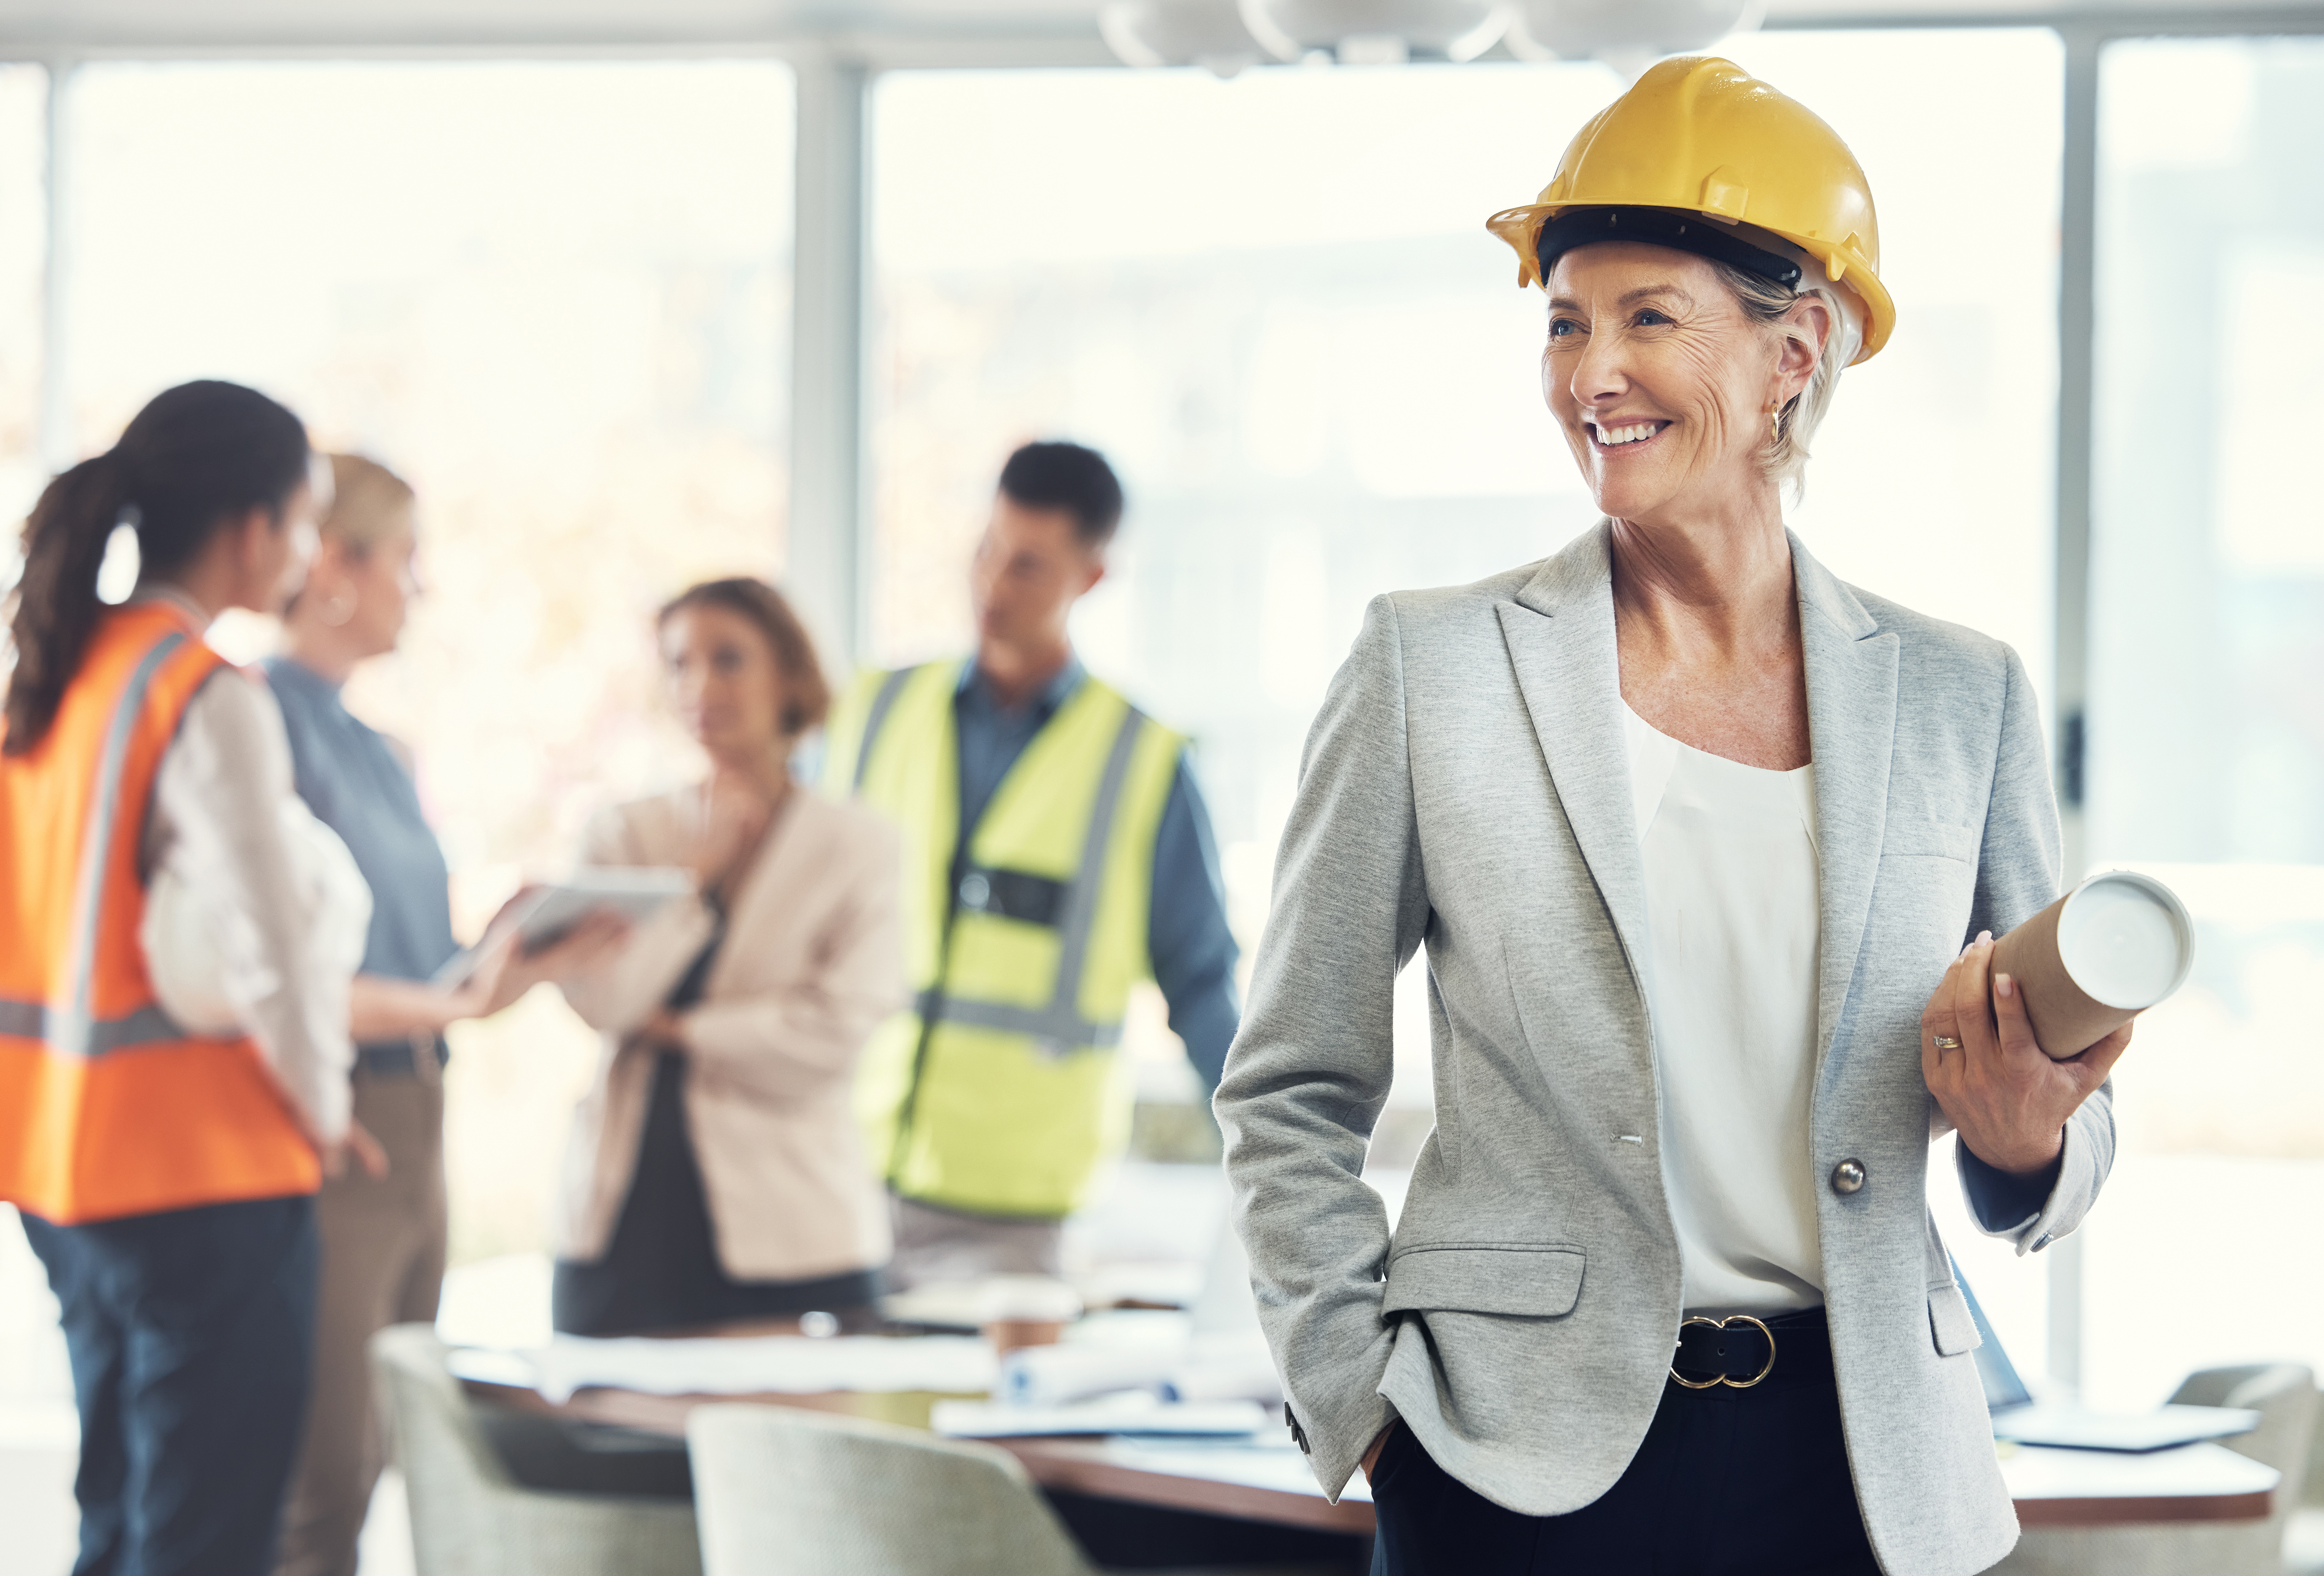 Female construction worker smiles in front of her colleagues